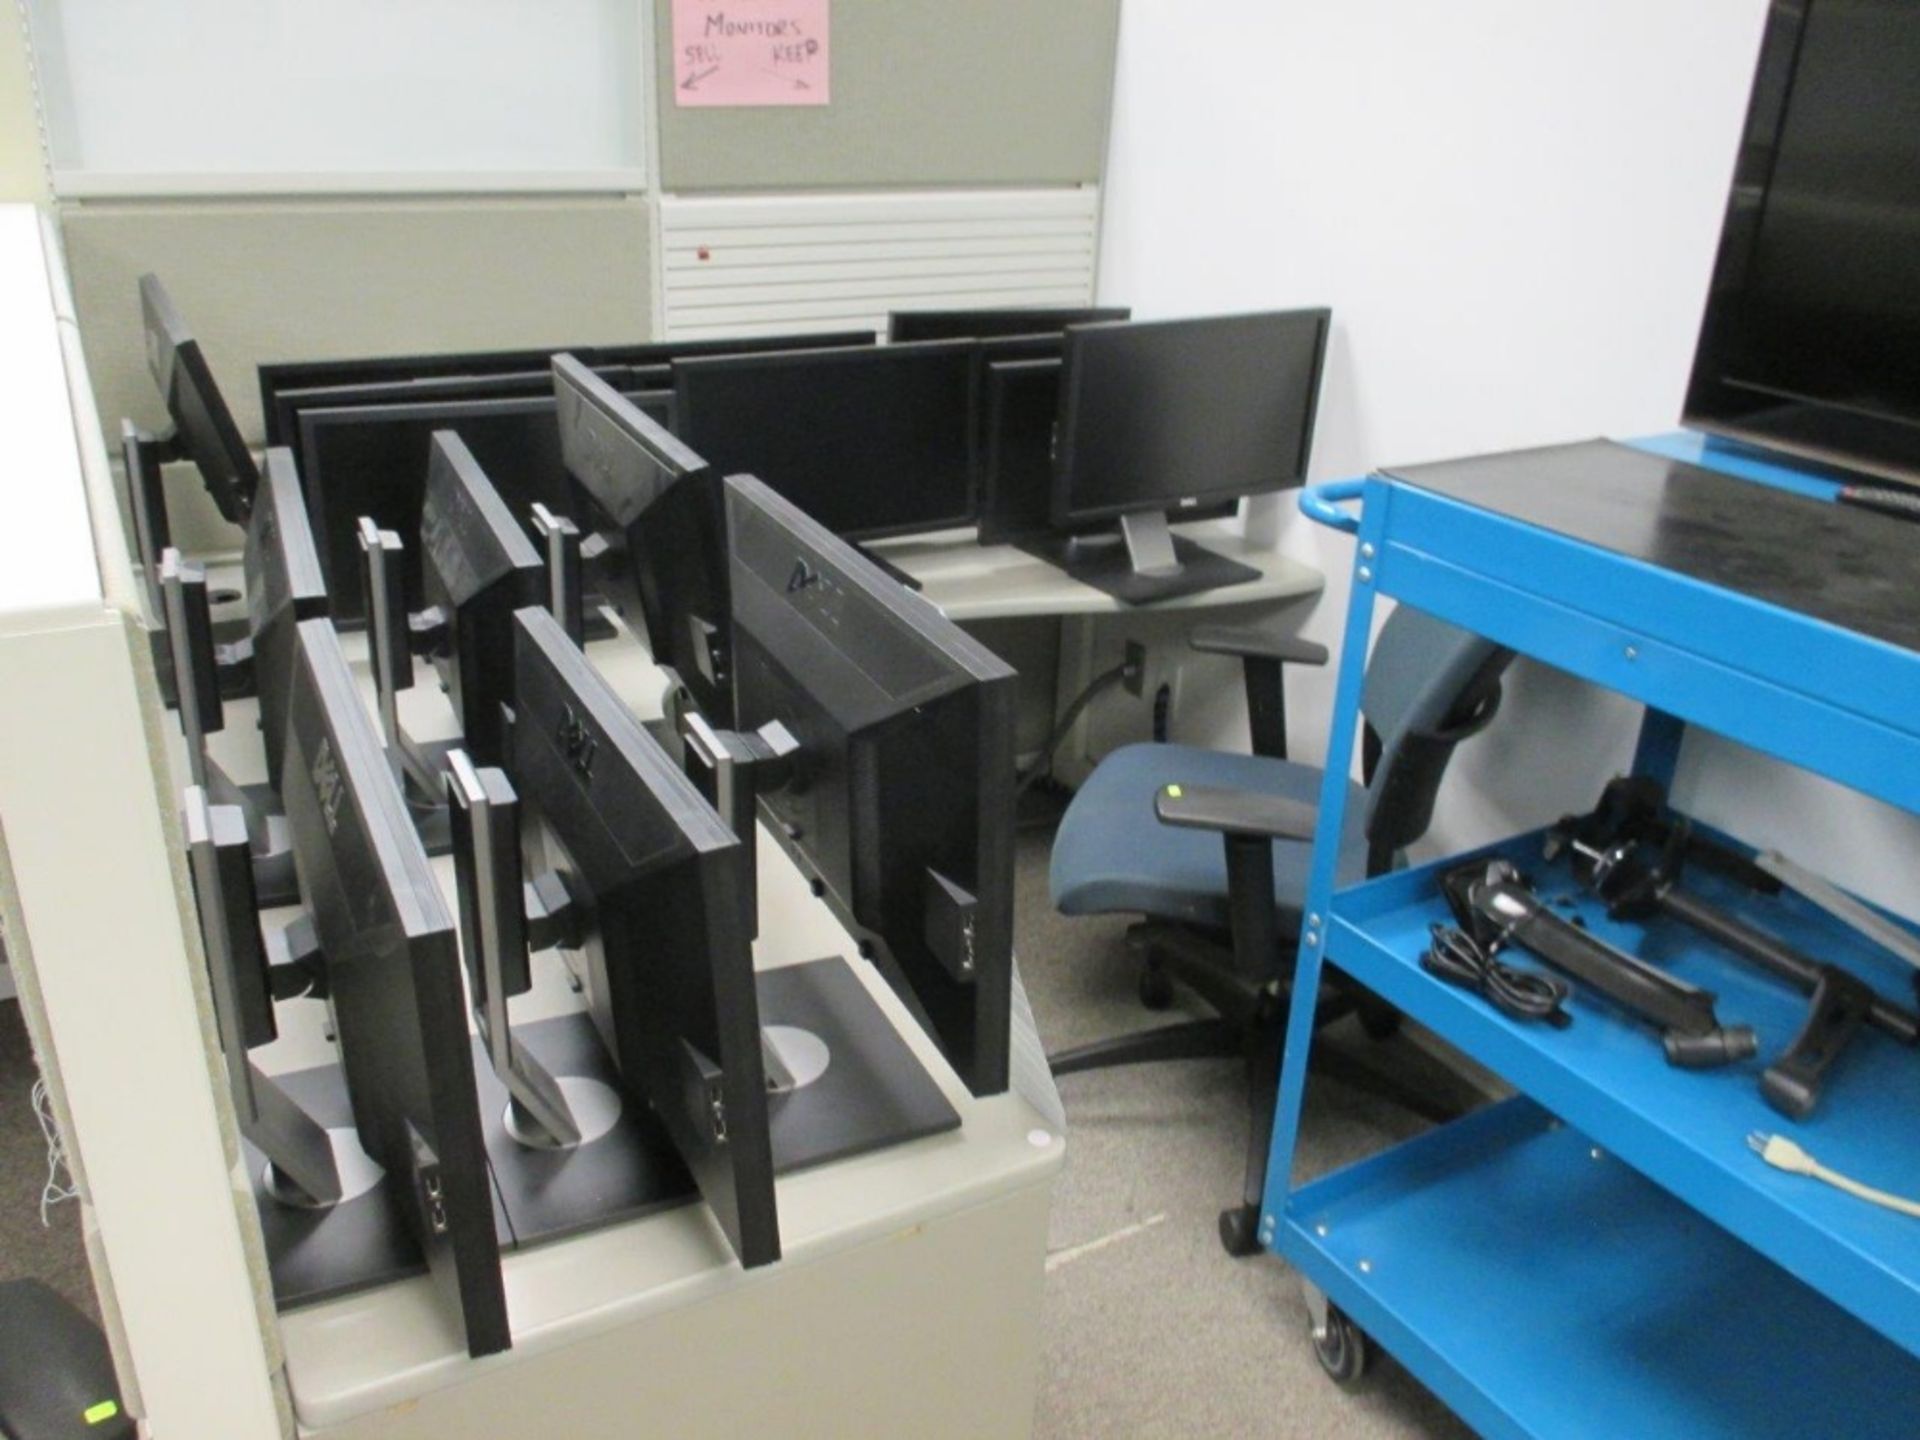 2008 Tecknion 8 Station Work Cubicle System - Image 3 of 6